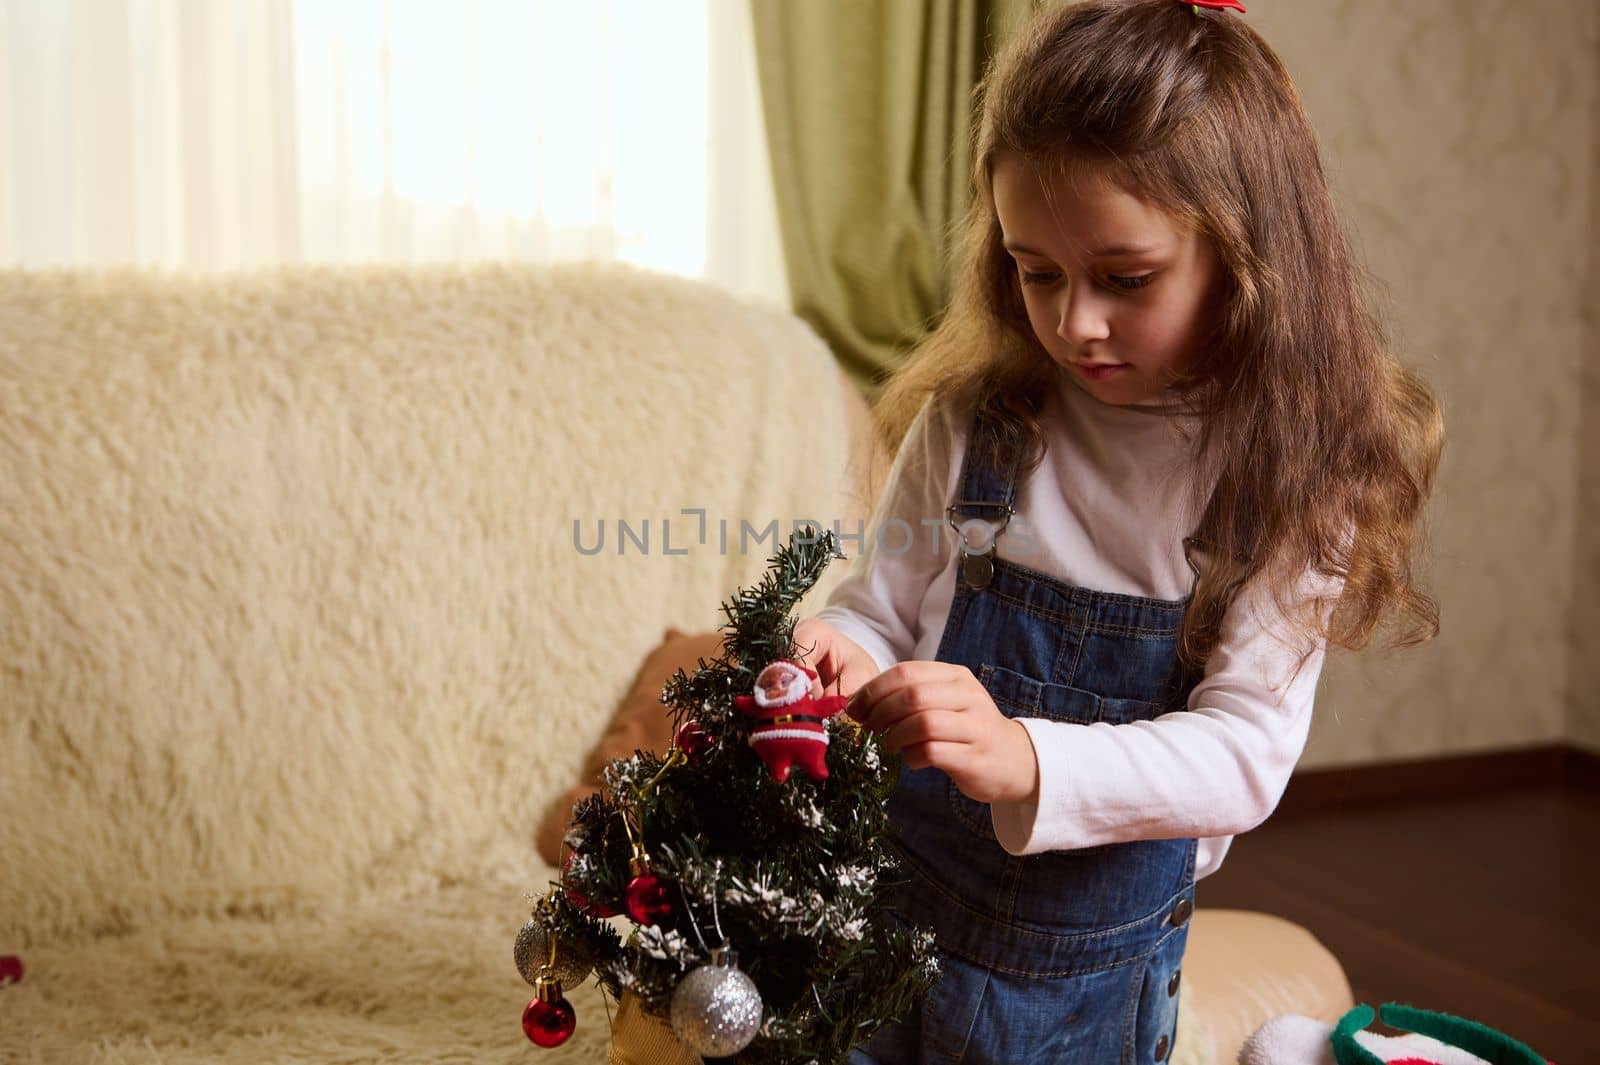 Adorable little girl holding shiny ball while hanging decorative Xmas toys on a Christmas tree in a cozy home interior. by artgf